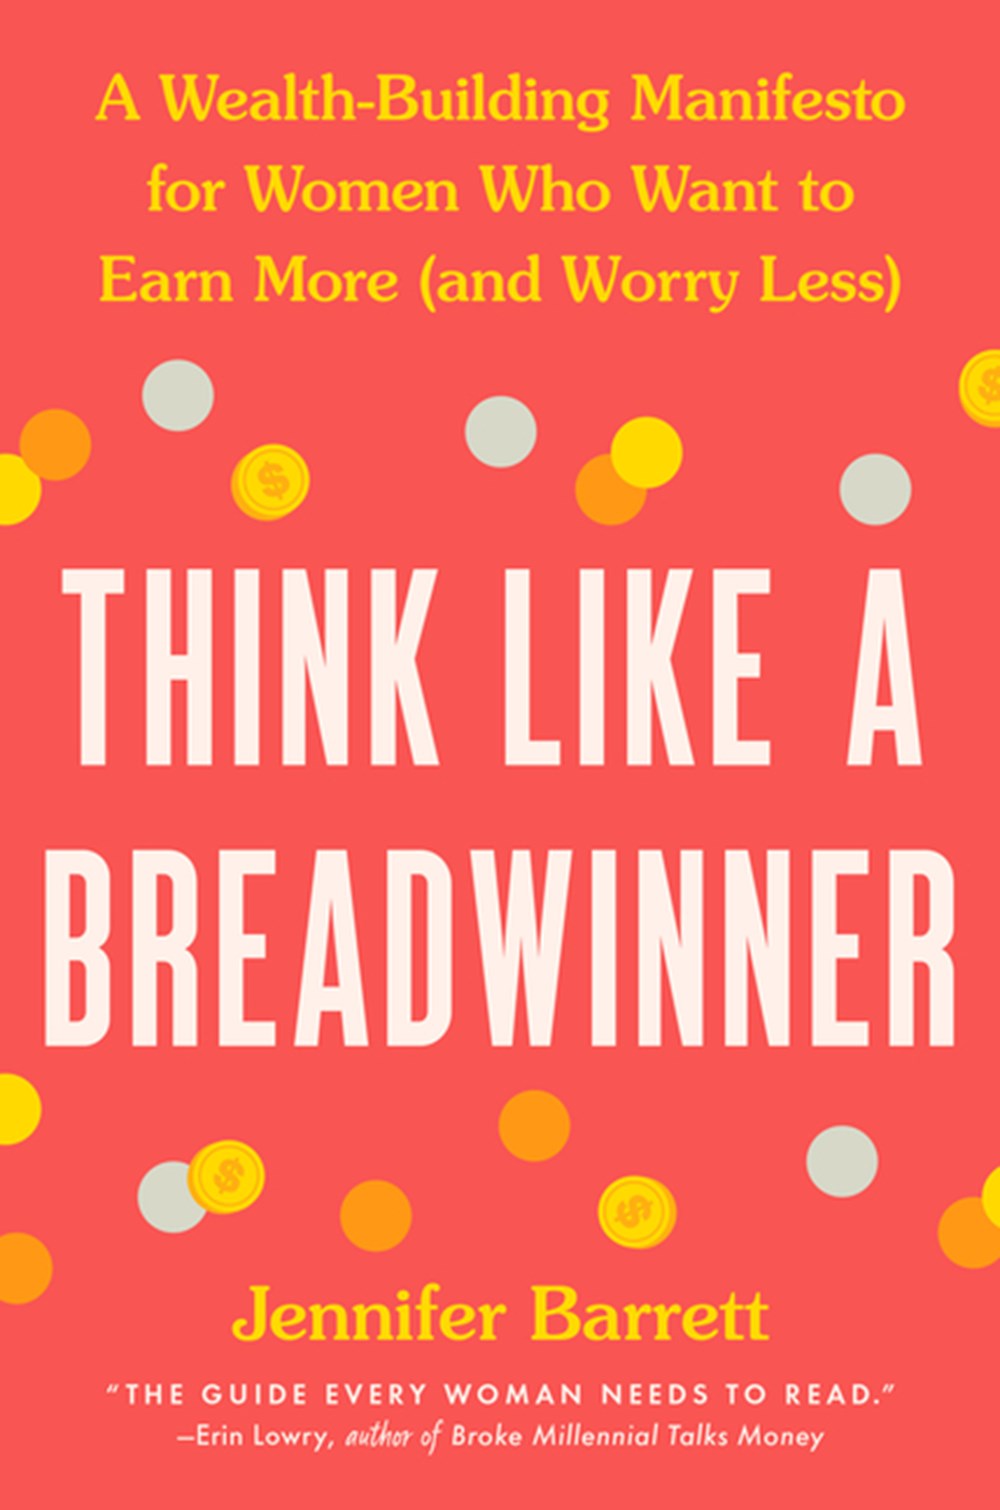 Think Like a Breadwinner A Wealth-Building Manifesto for Women Who Want to Earn More (and Worry Less